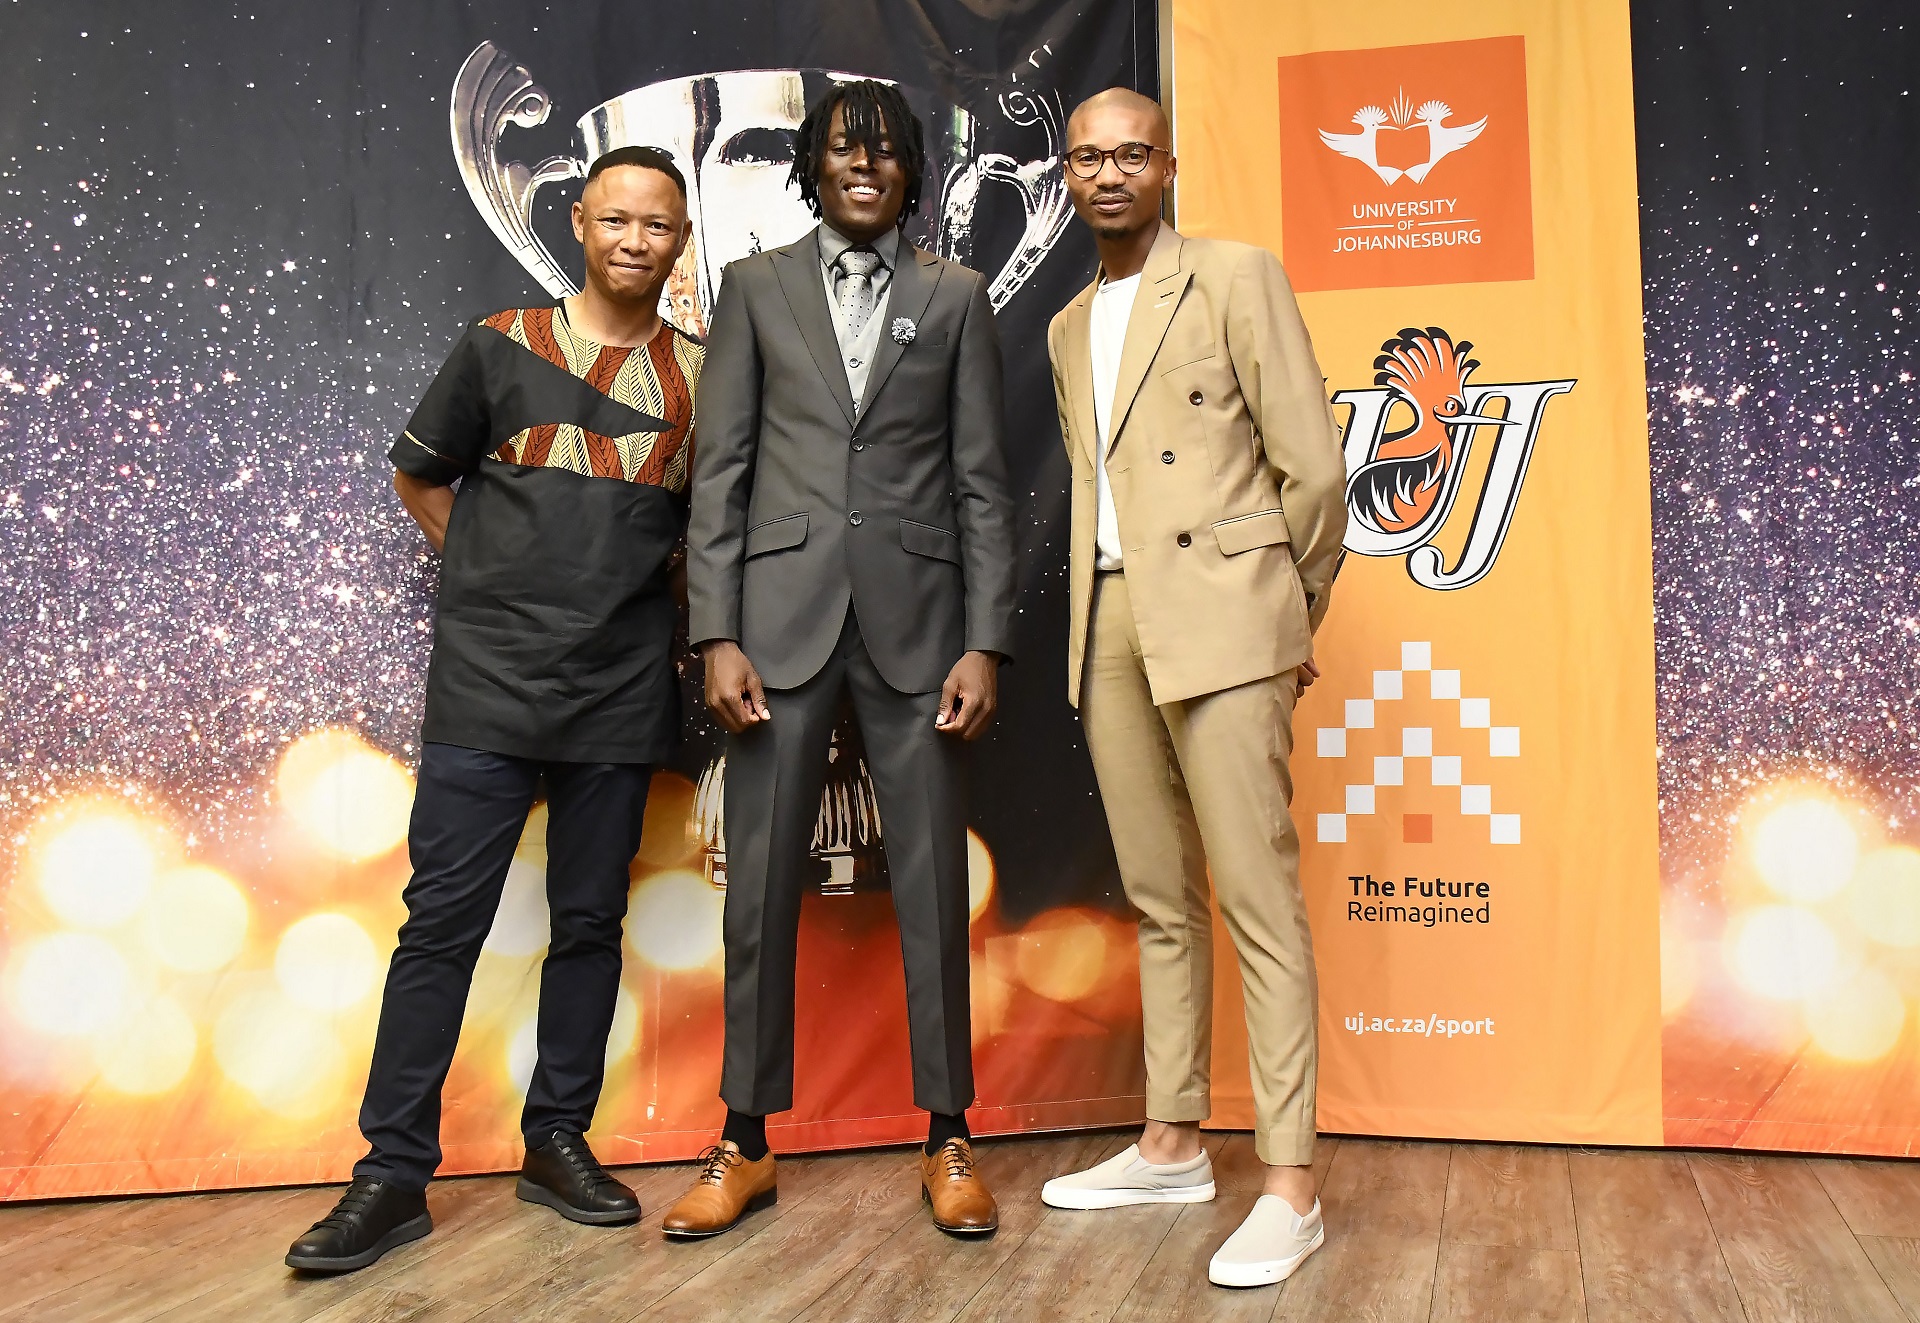 UJ Sport Awards, Football Coach, Player, and Team Manager